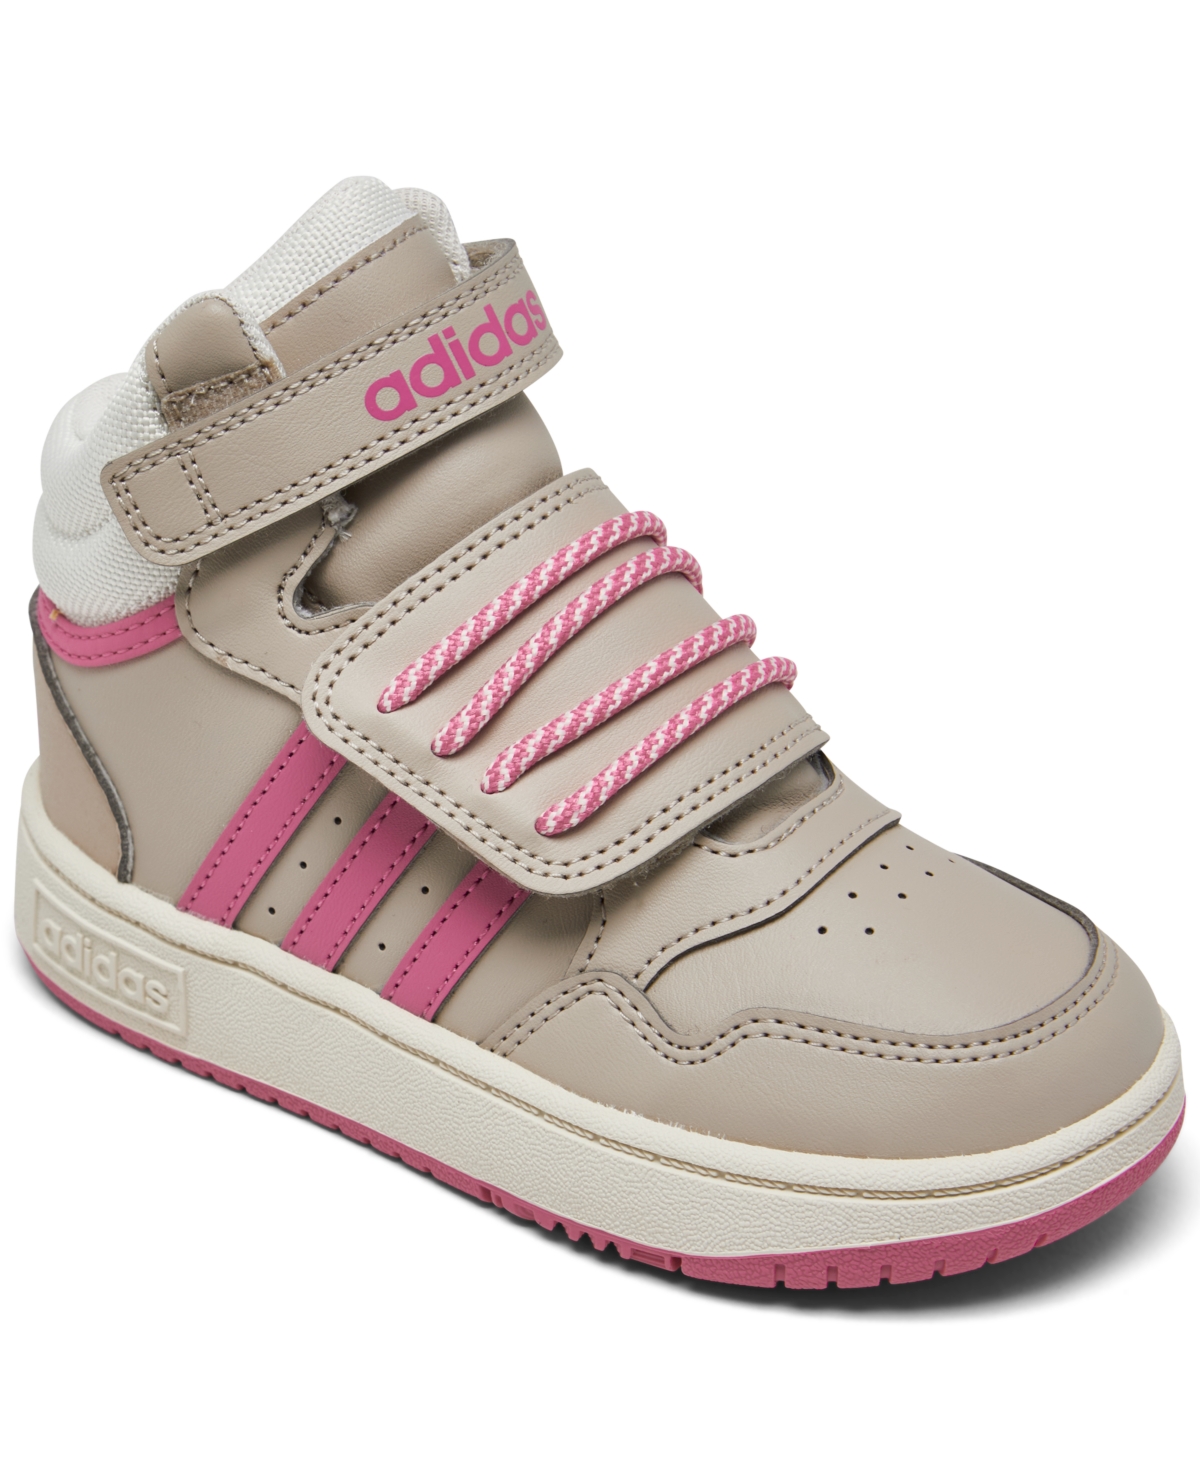 Adidas Originals Babies' Toddler Kids Hoops 3.0 Mid Classic Casual Sneakers From Finish Line In Beige,off White,pink